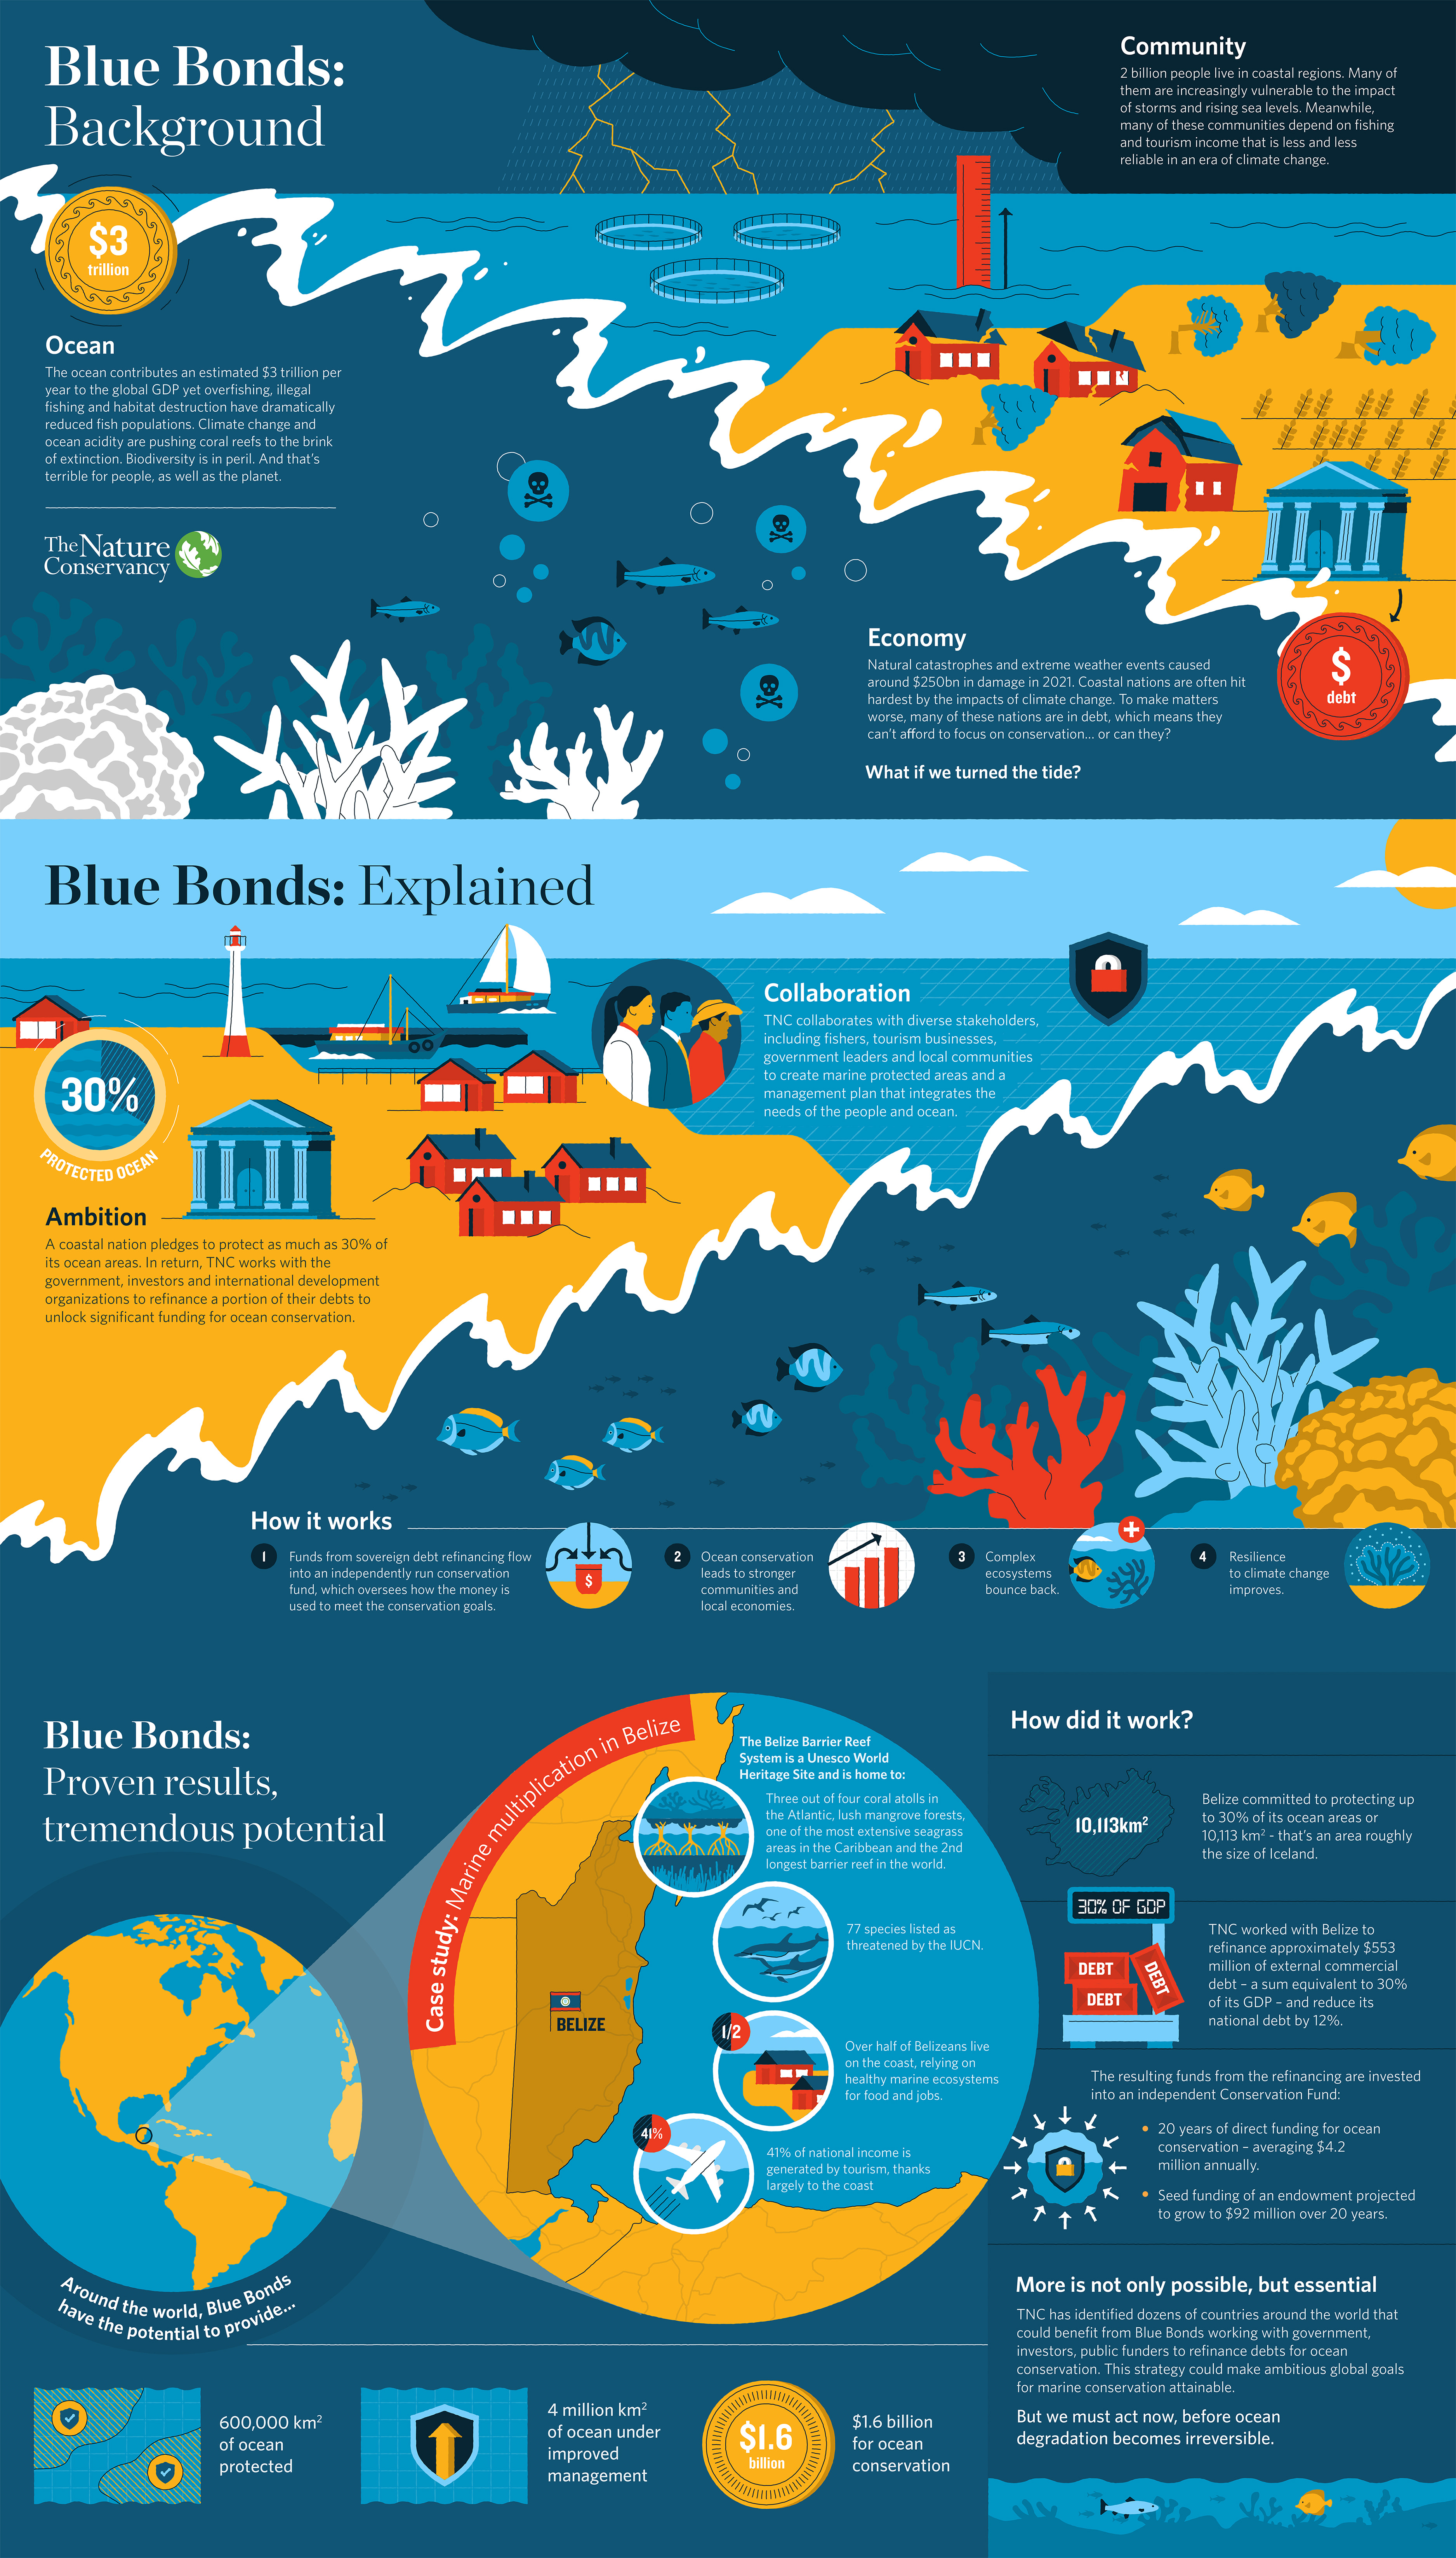 Thumbnail of a blue and yellow infographic